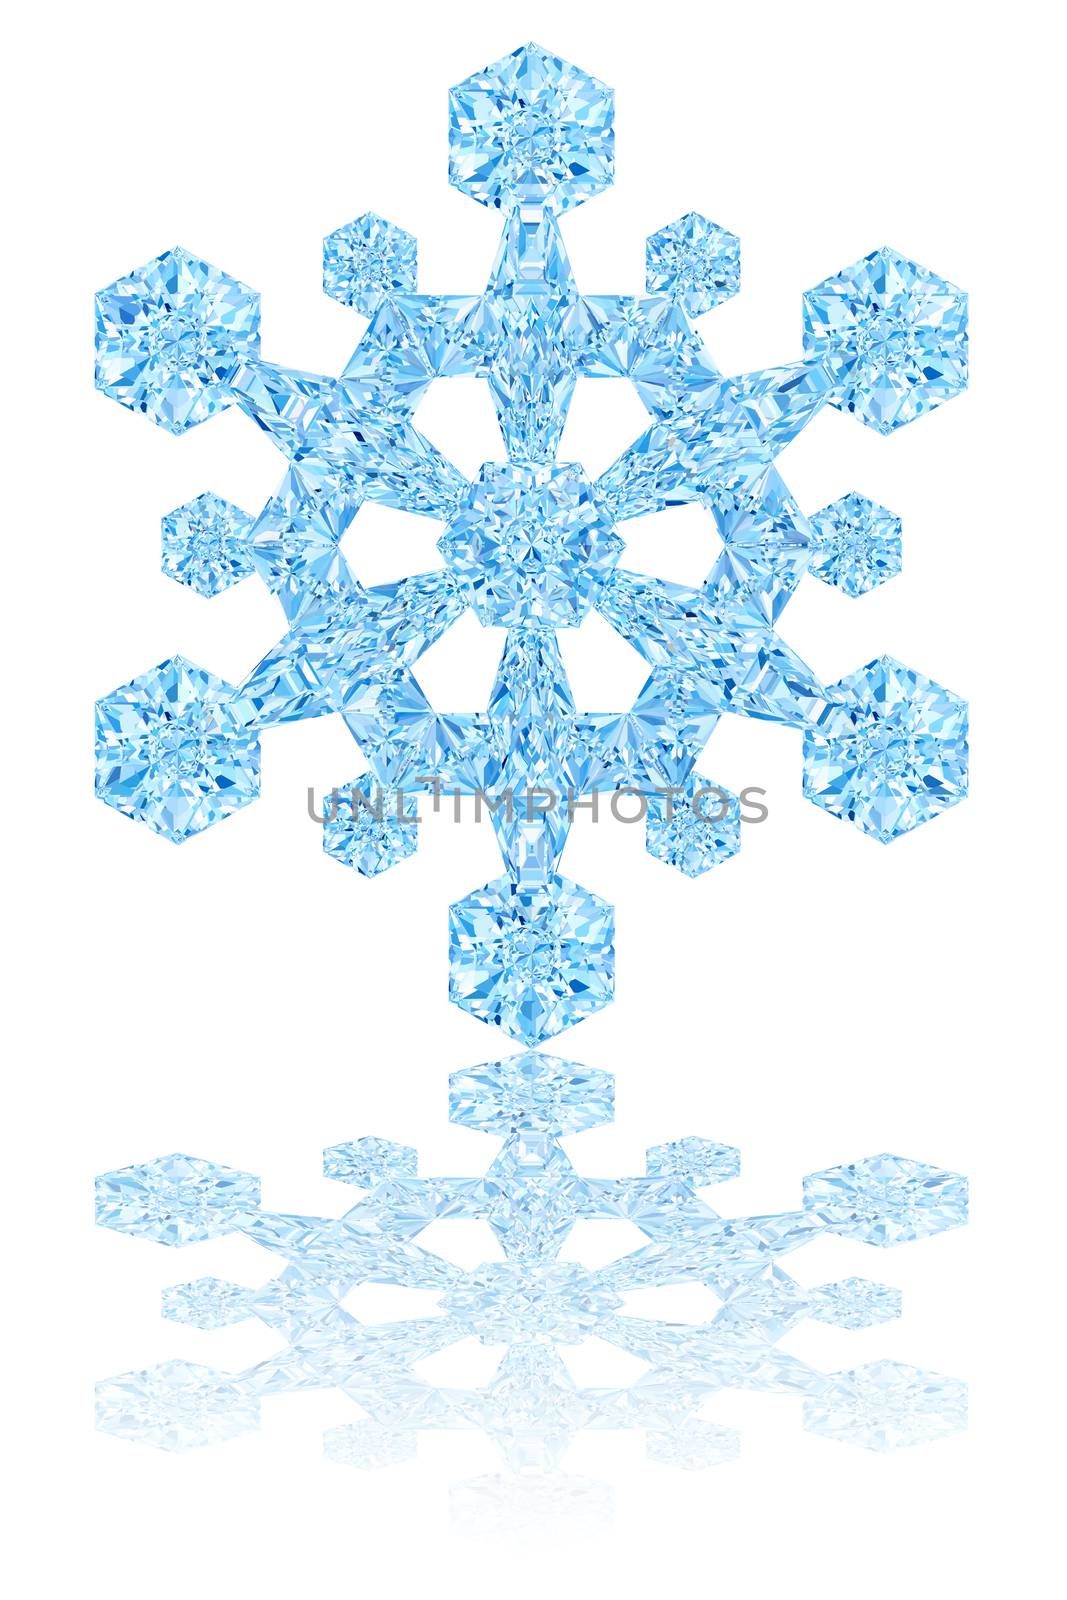 Light blue crystal snowflake on glossy white background. High resolution 3D image